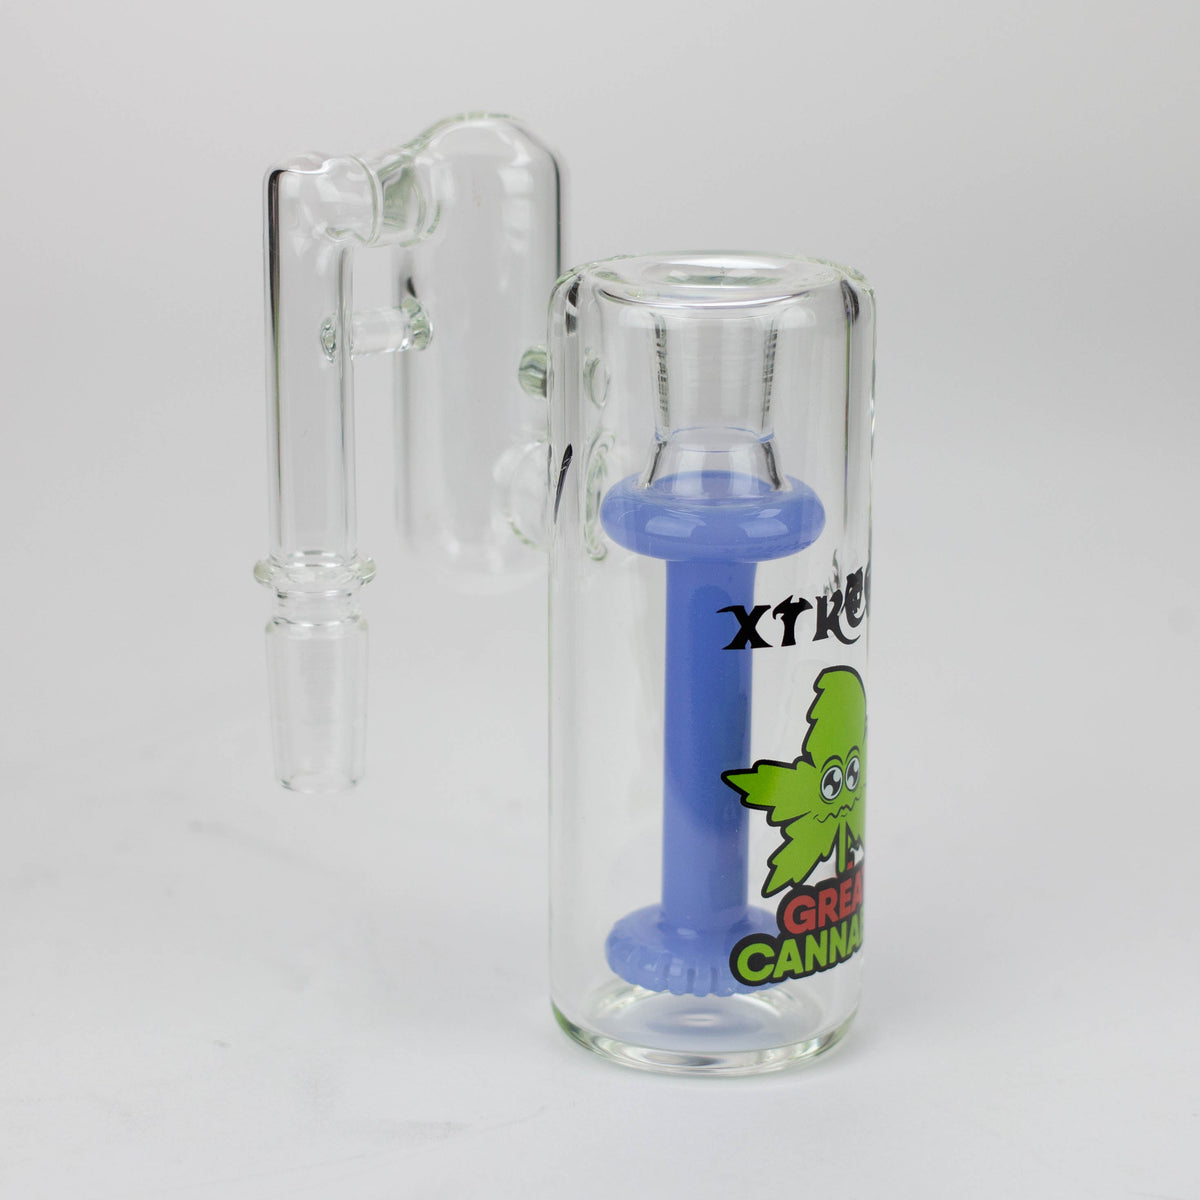 Xtreme 14mm "Great Cannabis" Showerhead Ash Catcher made from high quality borosilicate glass